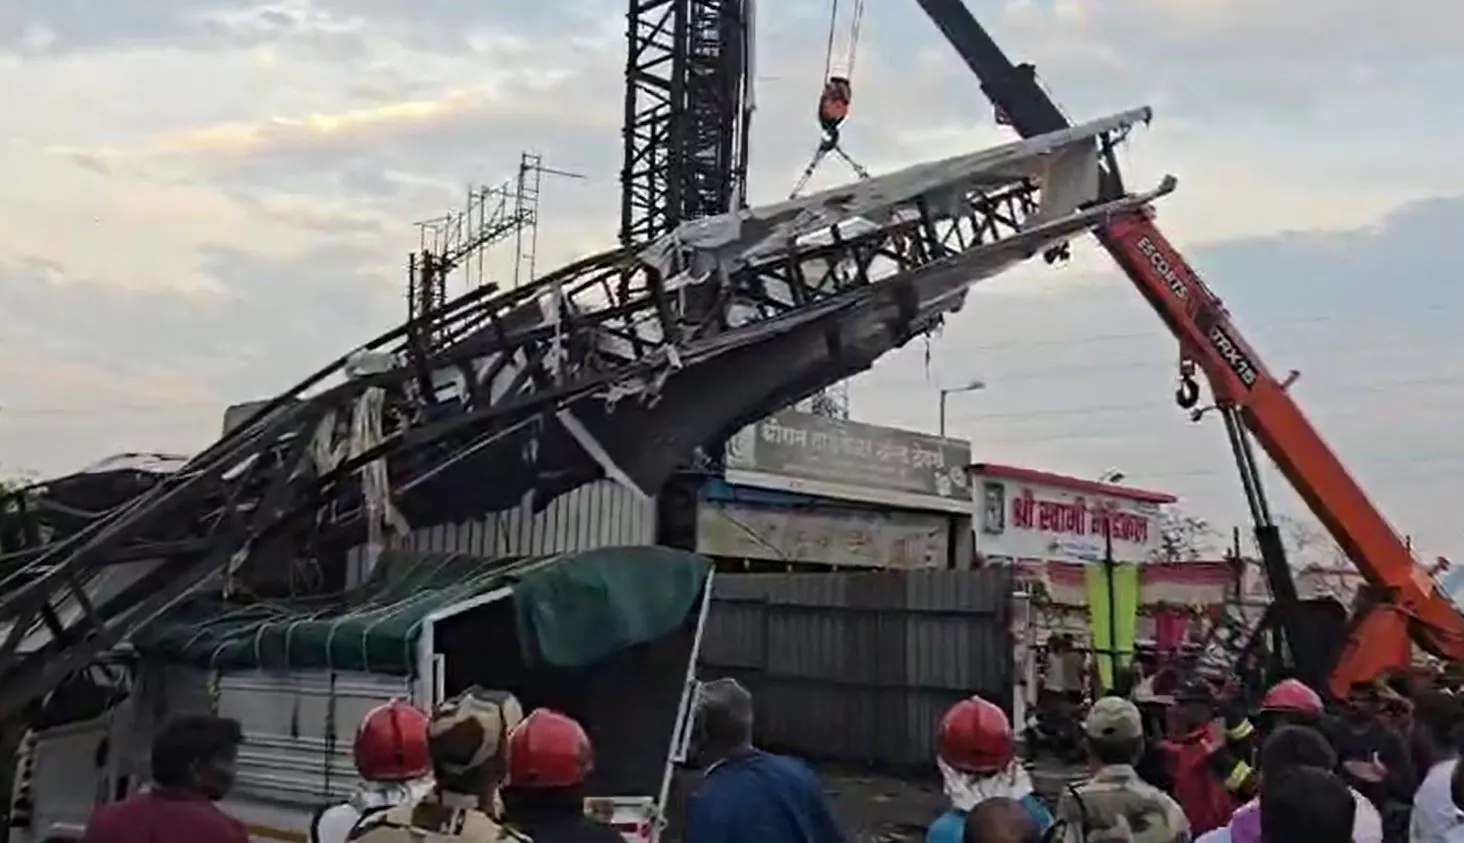 Pune billboard collapses due to strong winds, days after 16 killed in Mumbai tragedy